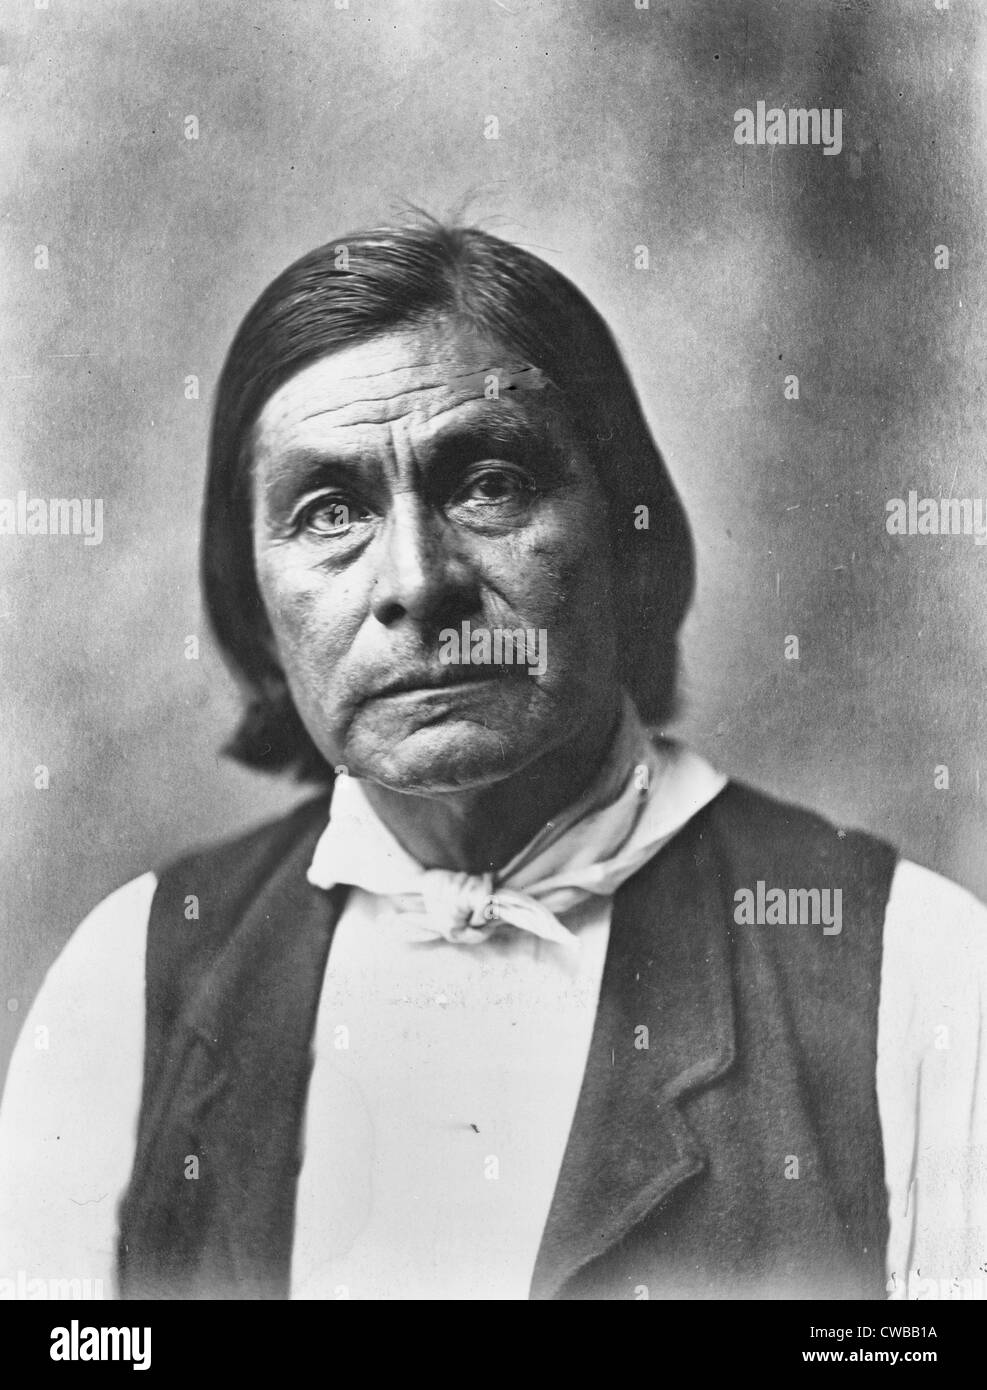 Chitto Harjo or Crazy Snake, head-and-shoulders portrait, facing front] Stock Photo